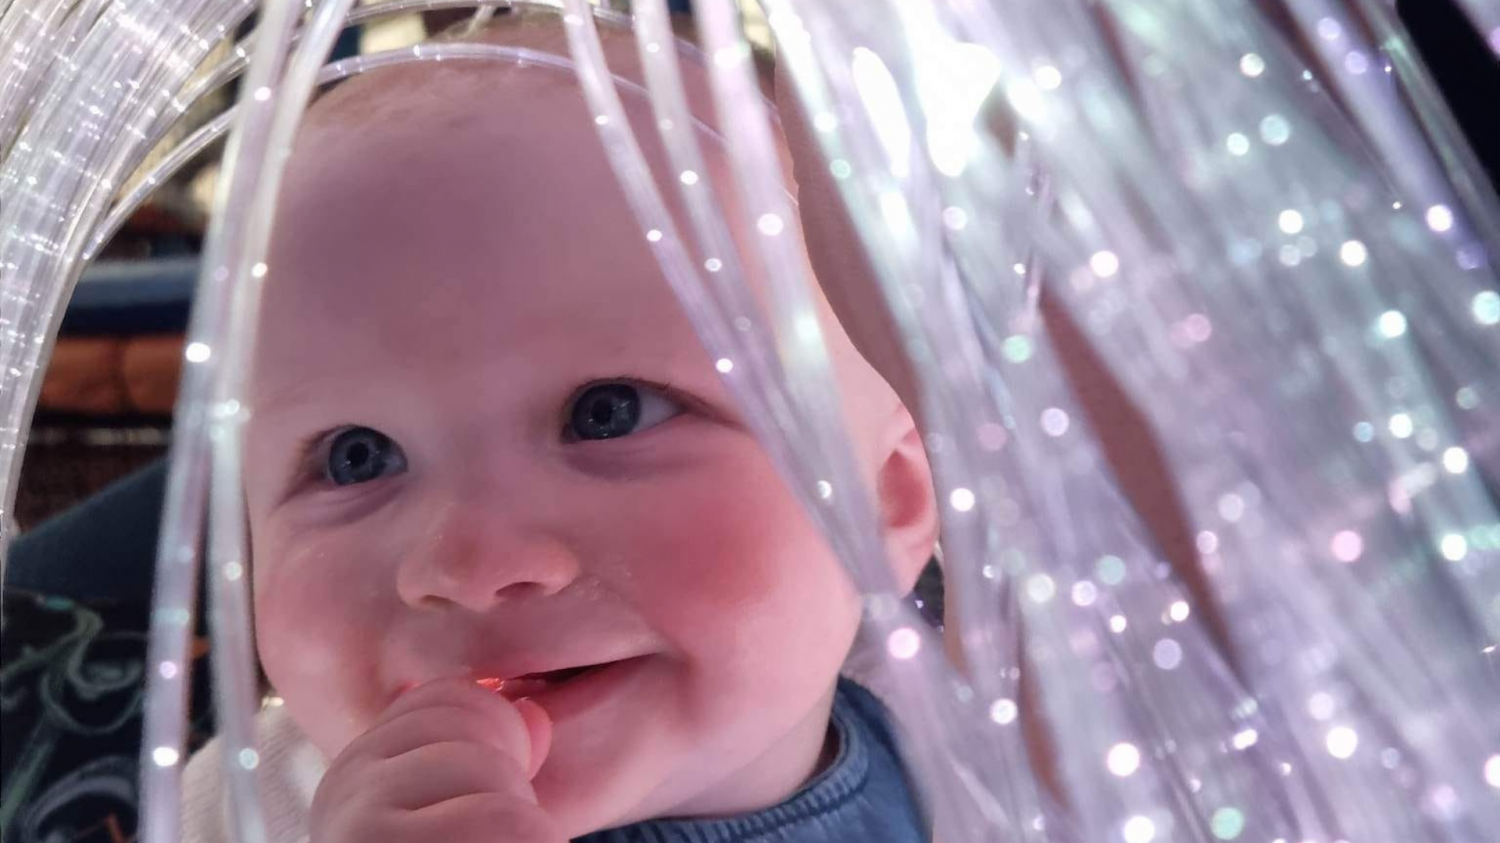 A small baby smiles as they enjoy sitting among a cascade of soft white lights.